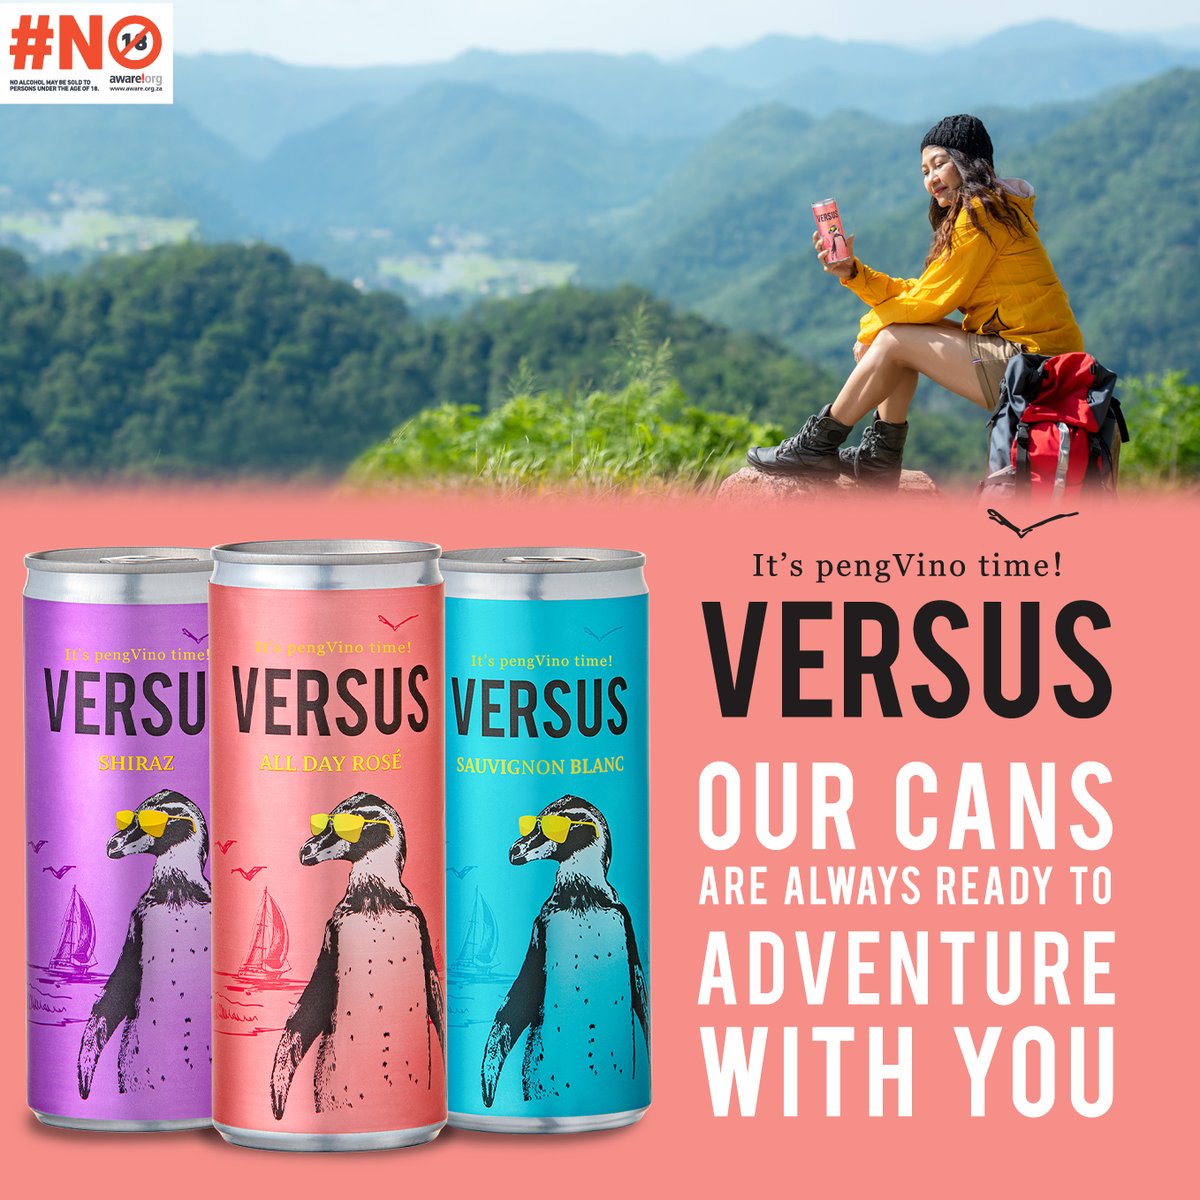 Even when packing space is limited, you can squeeze us in anywhere! Versus Wines – always up for an adventure! Shop online at: versuswines.co.za 
#versus #versuswines #adventure #adventurewithyou #wineinacan #cando #IloveVersus #lovemywinecan #shopsipsupport #Sanccob